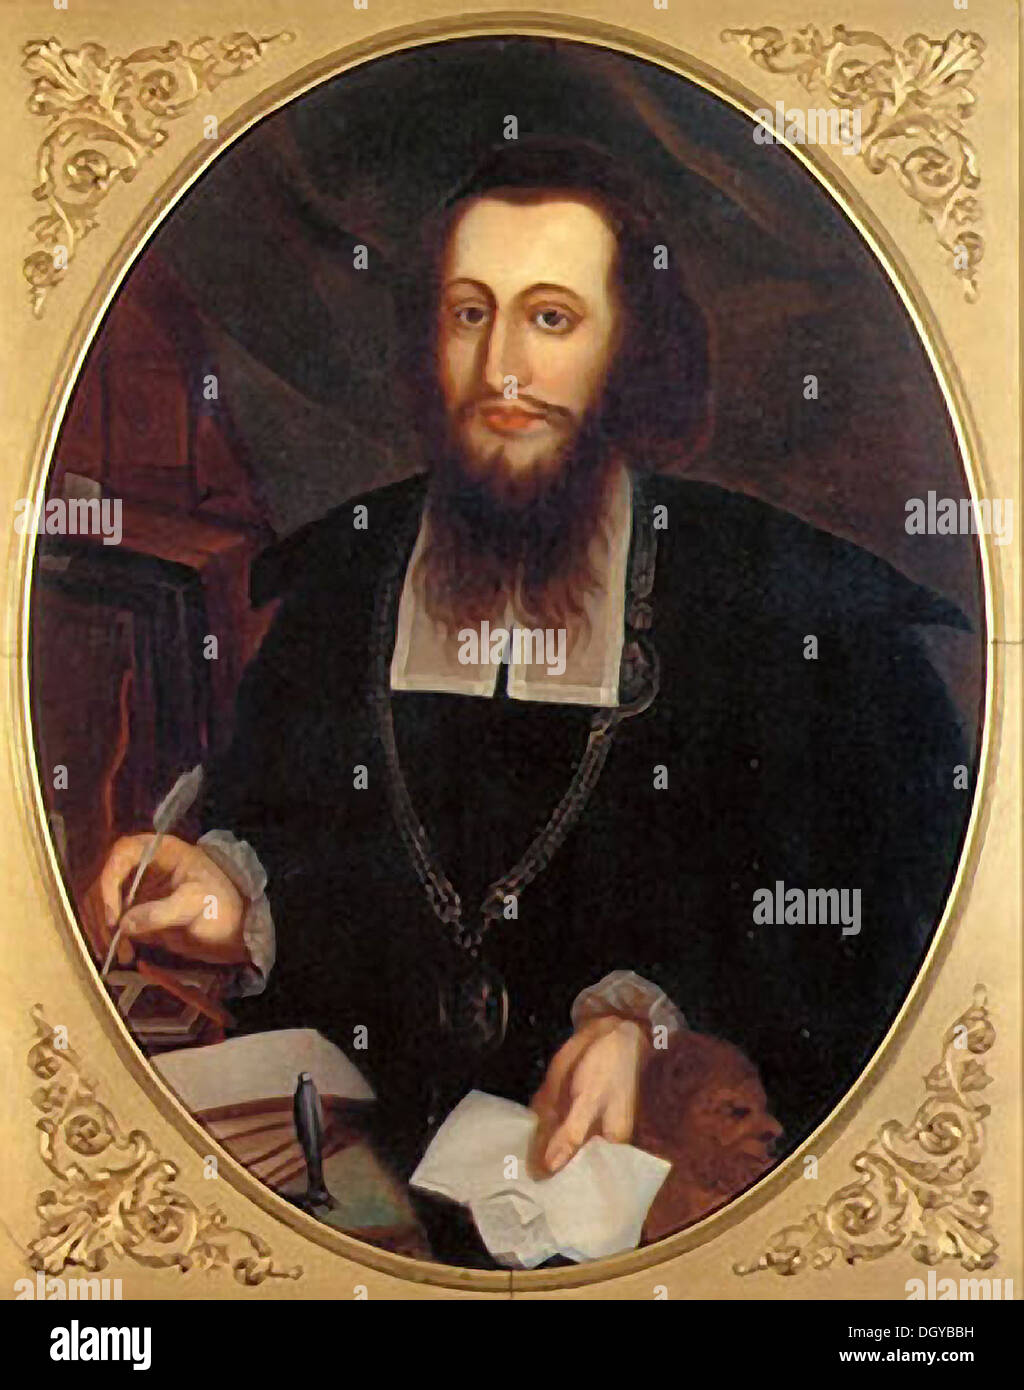 5664. Samson Wertheimer (1658-1724) was a rabbi, financier and Court Jew under Leopold I. He was one the original founders of the Viennese Jewish community in modern times Stock Photo